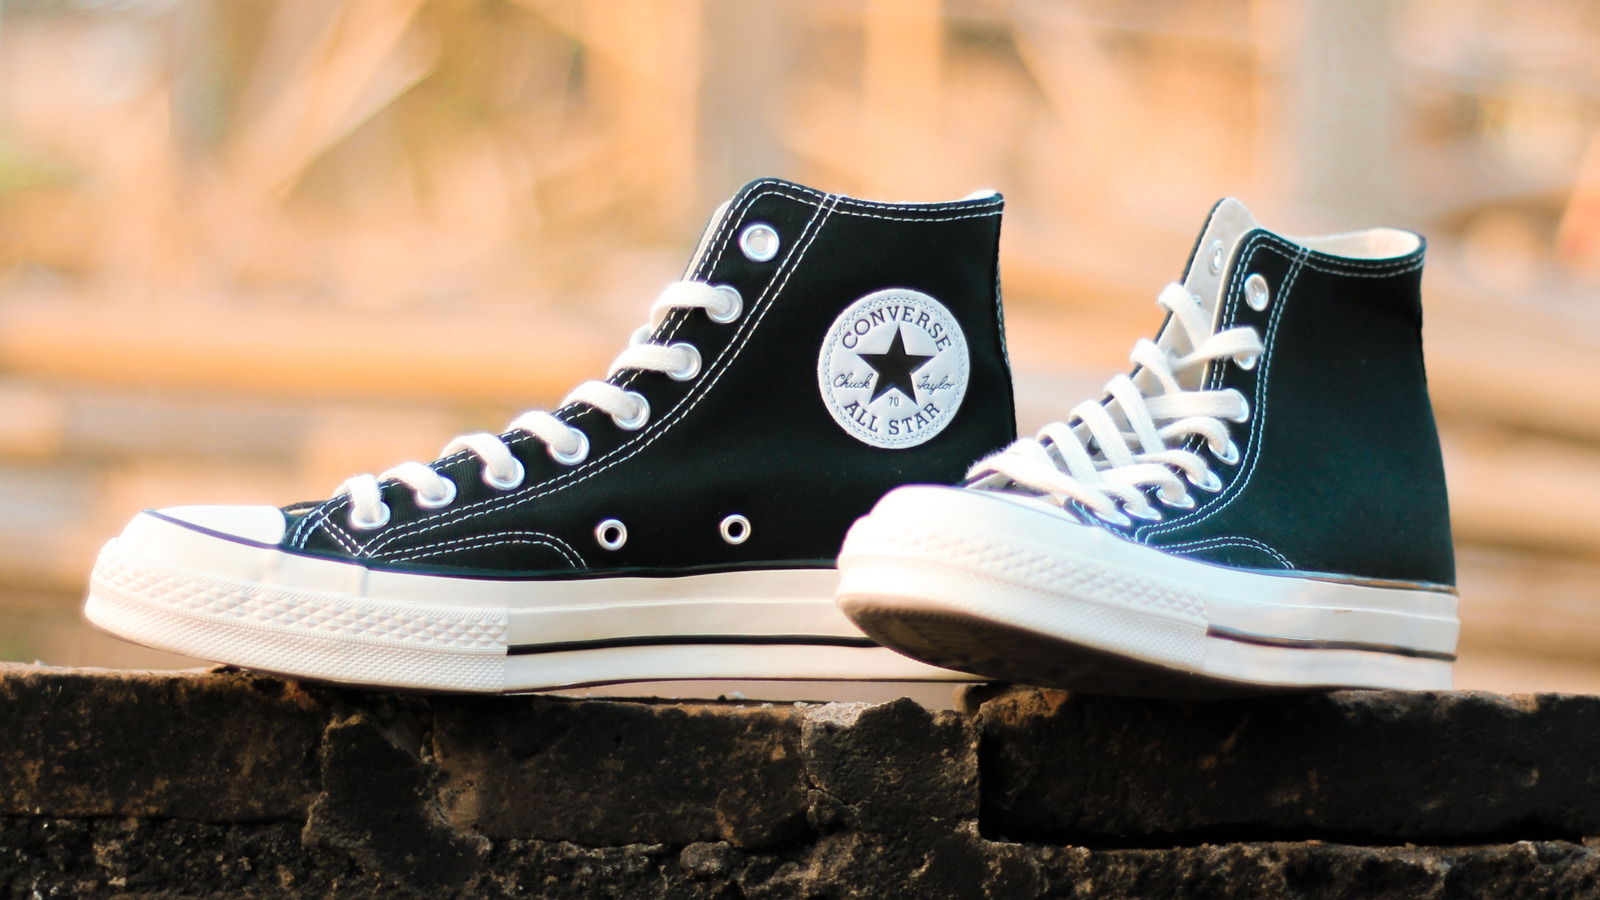 Chuck Taylors Are Over 100 Years Old. Here's What You Should Know